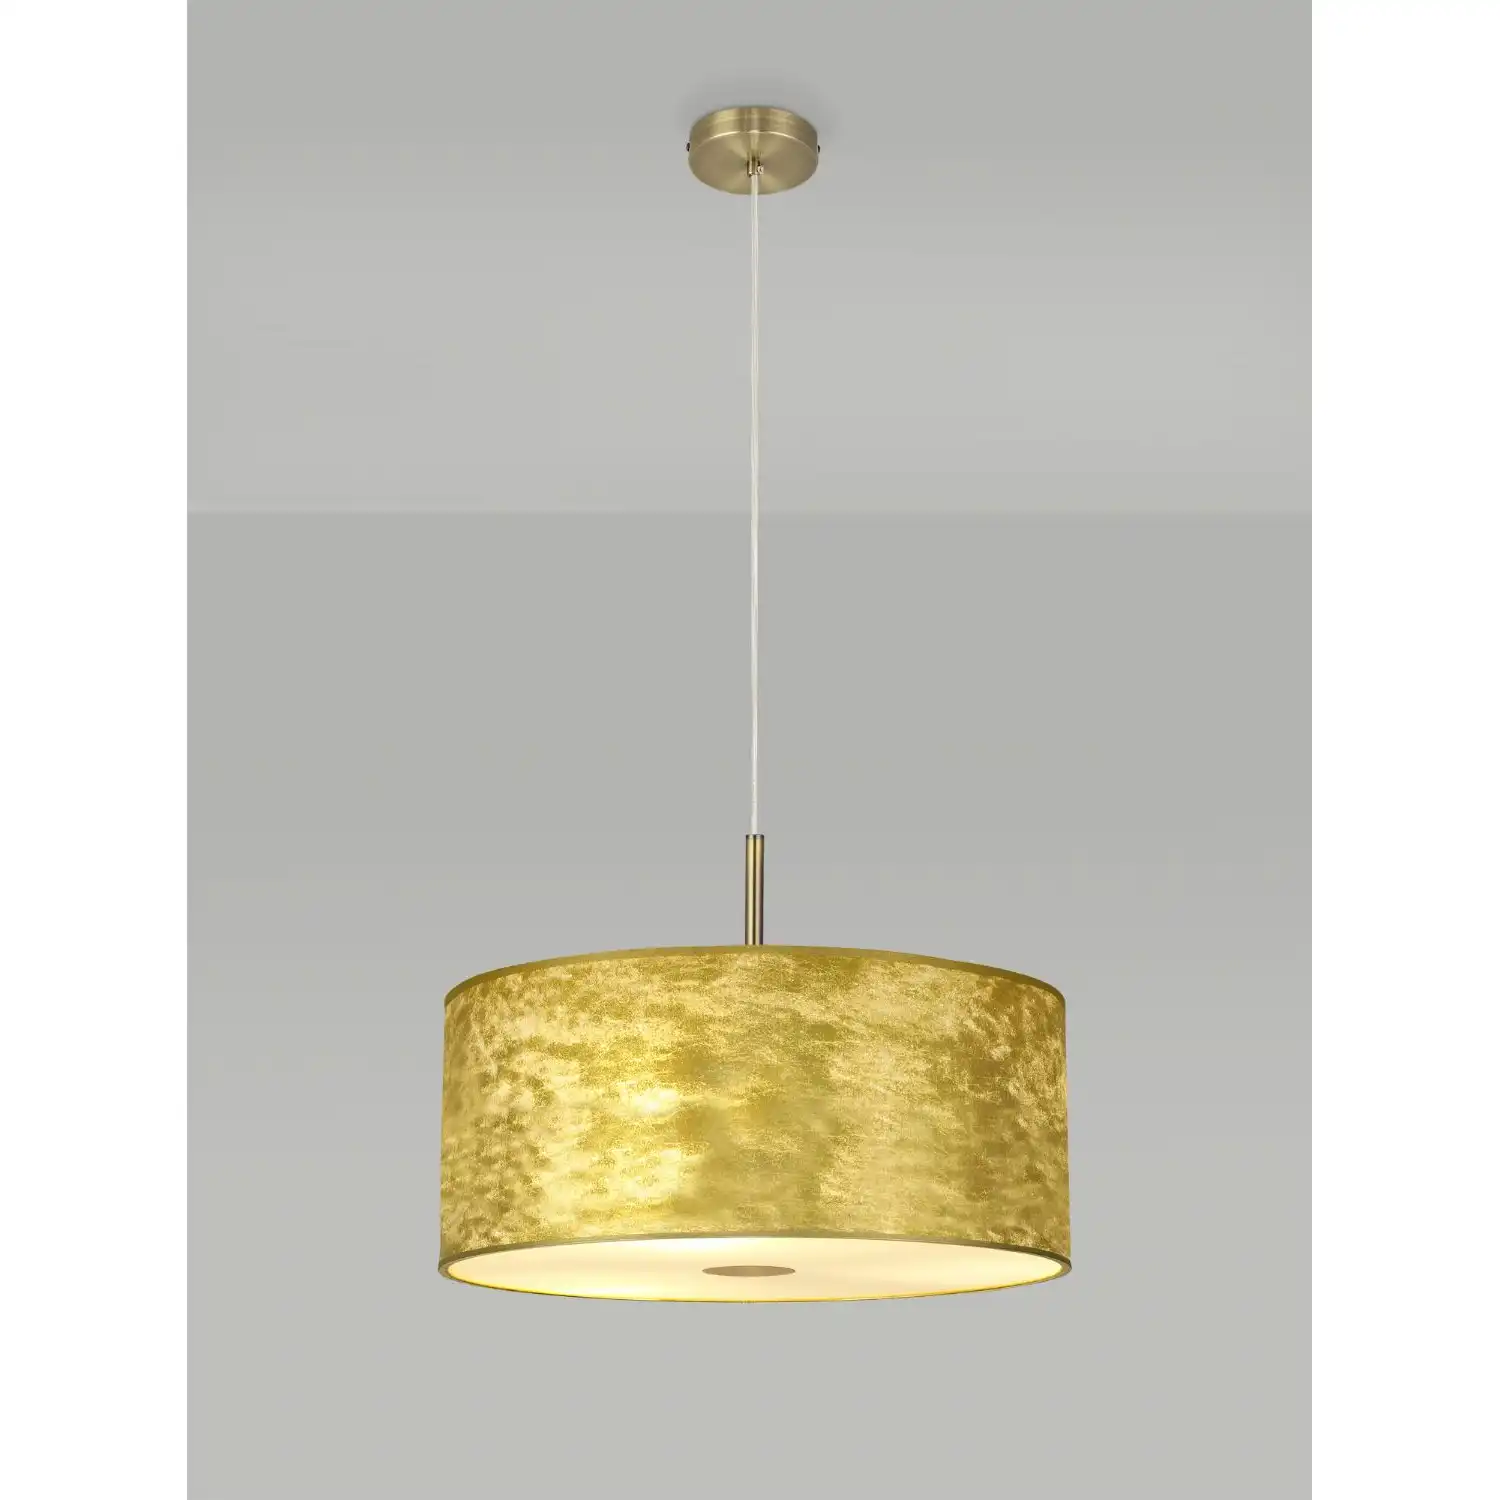 Baymont Antique Brass 3m 5 Light E27 Single Pendant With 500mm Gold Leaf Shade With Frosted Acrylic Diffuser With Antique Brass Centre